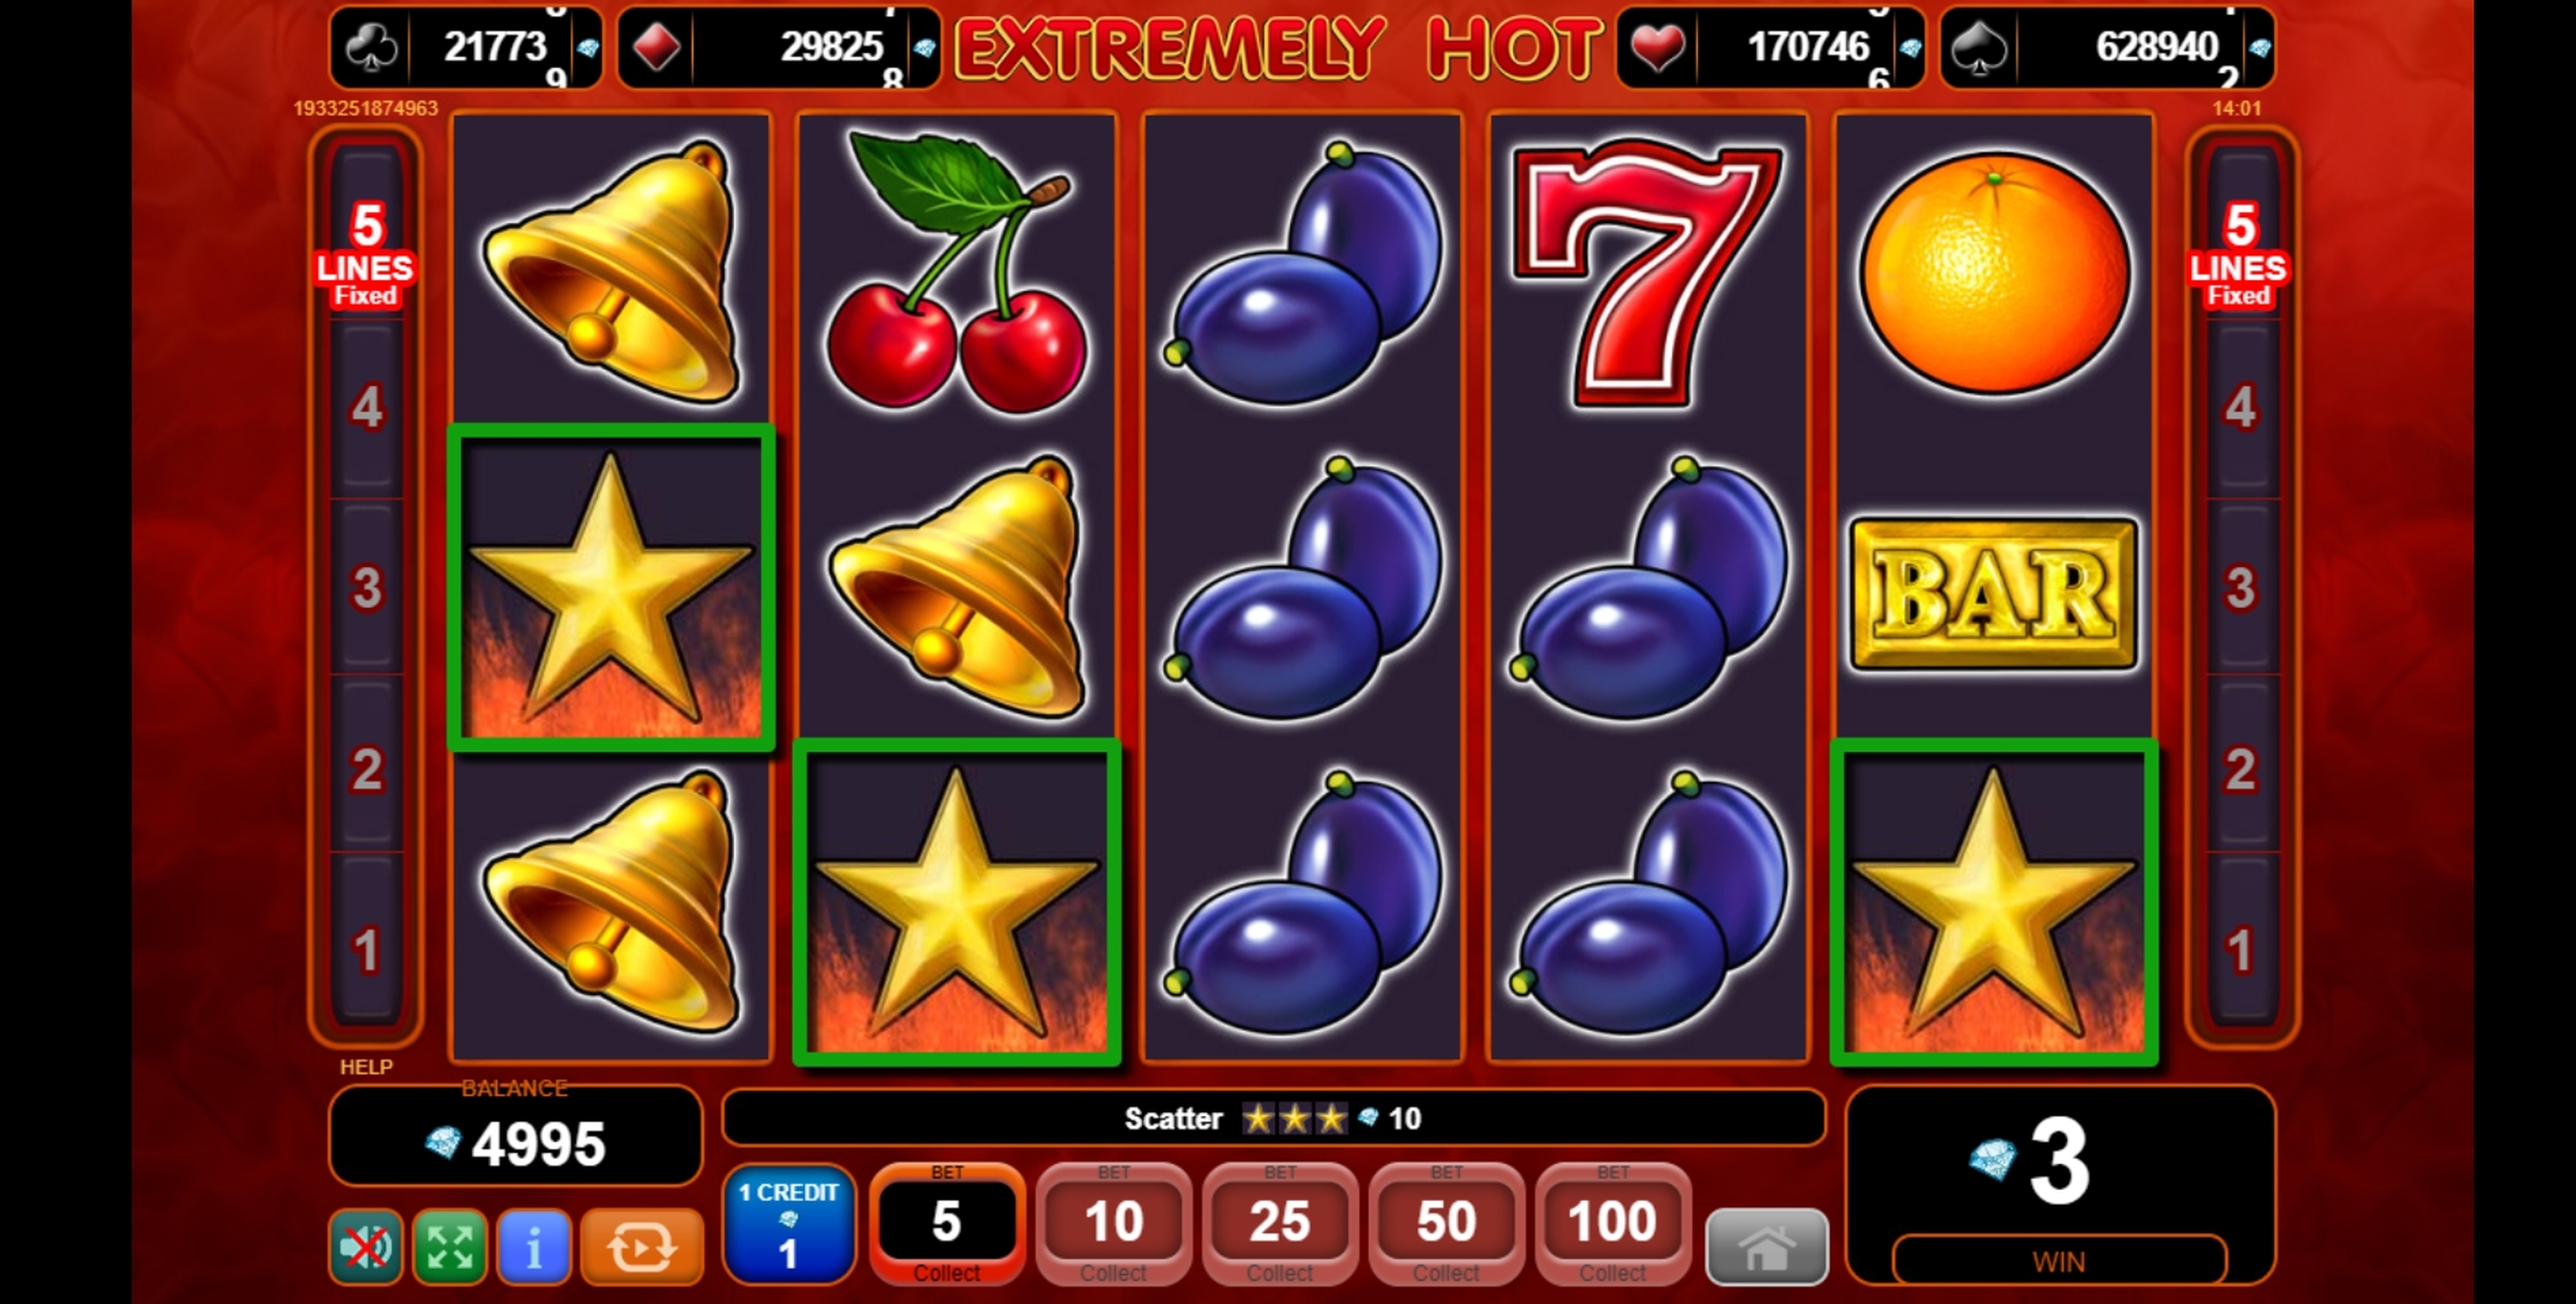 Win Money in Extremely Hot Free Slot Game by EGT